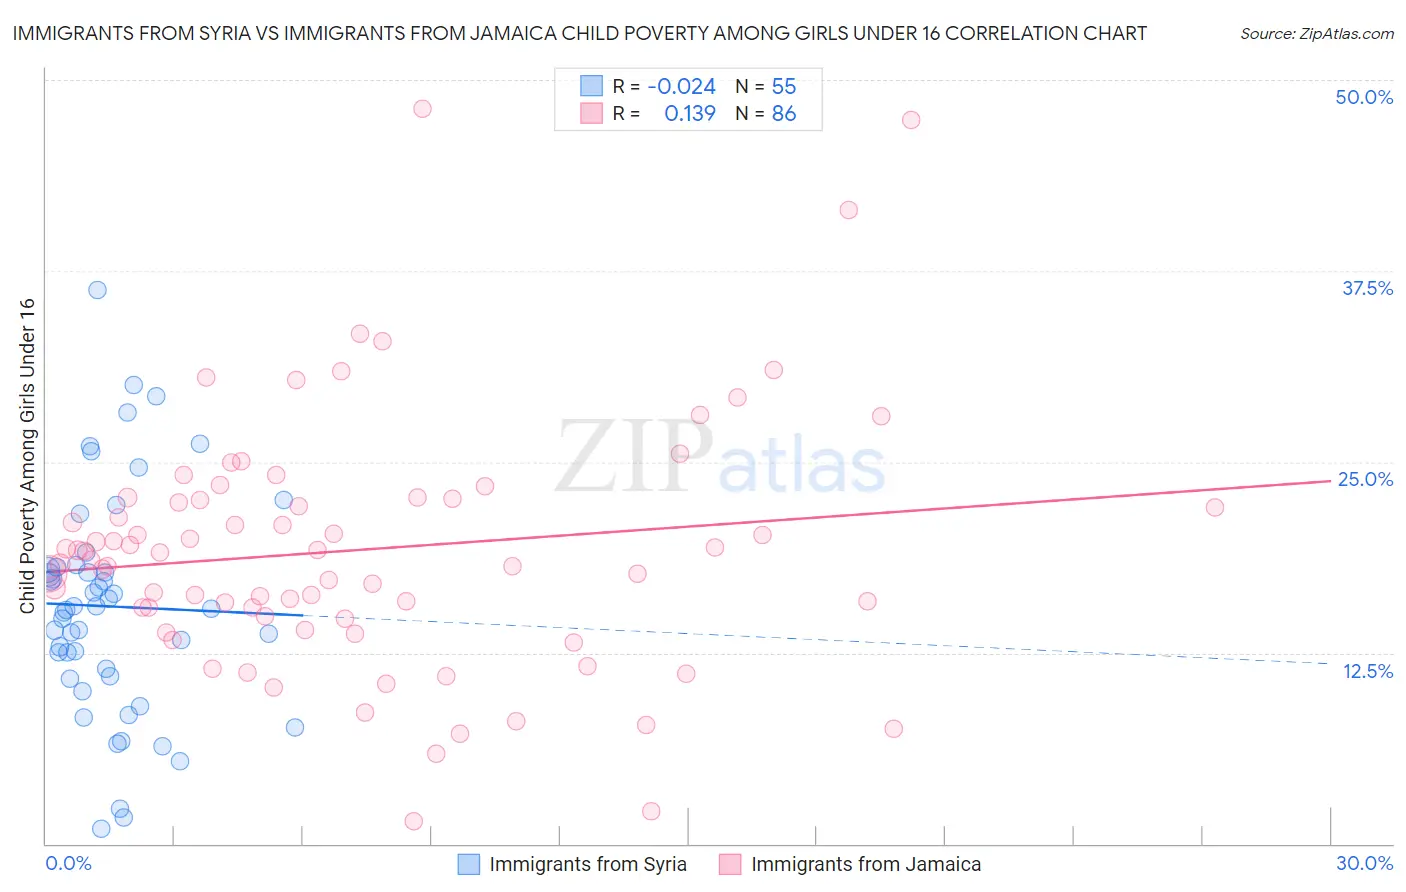 Immigrants from Syria vs Immigrants from Jamaica Child Poverty Among Girls Under 16